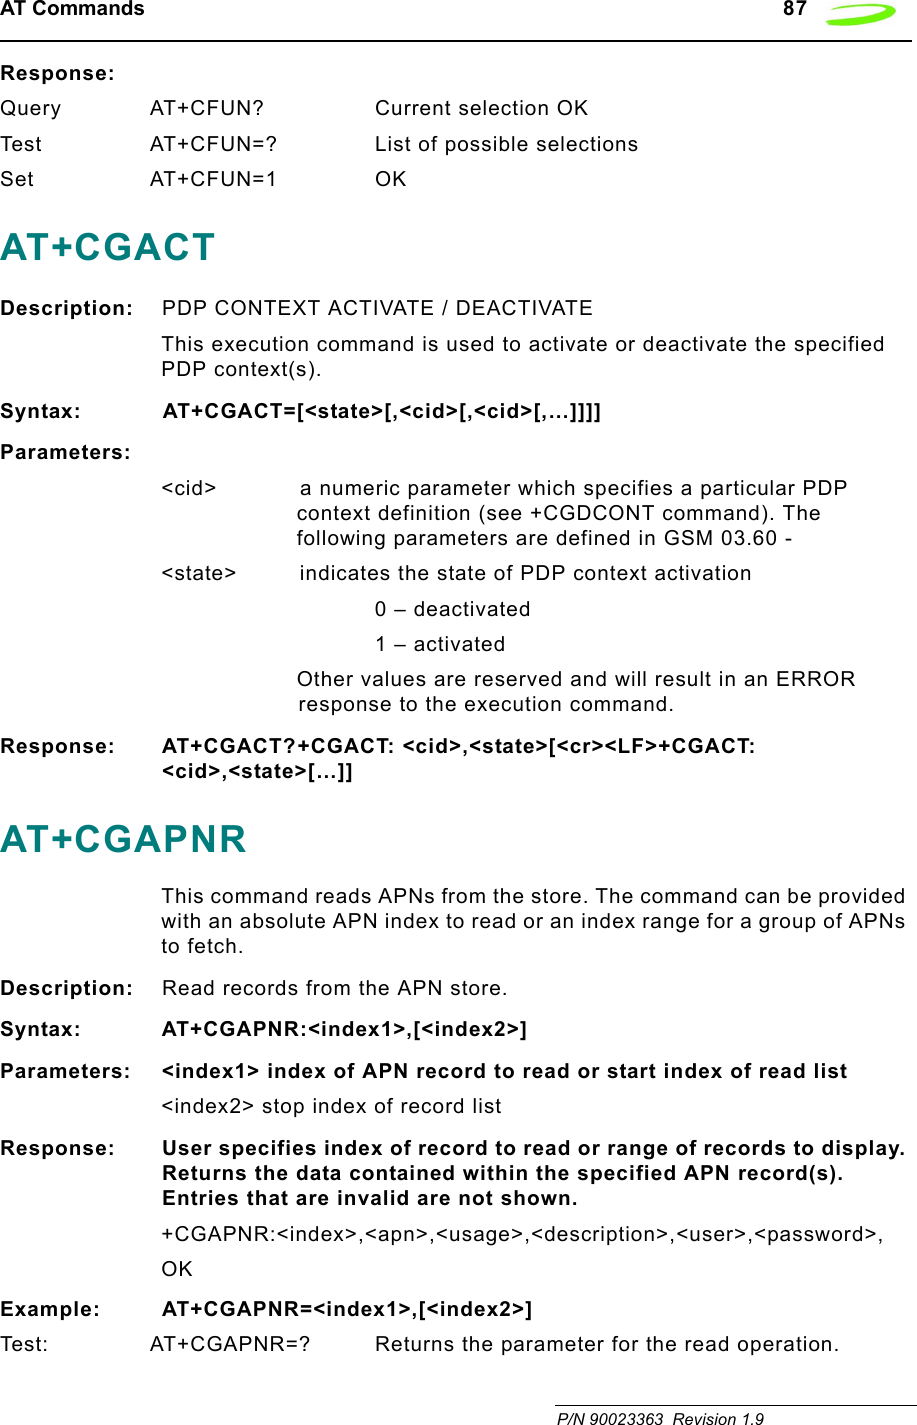 AT Commands   87 P/N 90023363  Revision 1.9Response:Query AT+CFUN? Current selection OKTest AT+CFUN=? List of possible selectionsSet AT+CFUN=1 OKAT+CGACTDescription: PDP CONTEXT ACTIVATE / DEACTIVATEThis execution command is used to activate or deactivate the specified PDP context(s).Syntax: AT+CGACT=[&lt;state&gt;[,&lt;cid&gt;[,&lt;cid&gt;[,…]]]]Parameters:&lt;cid&gt; a numeric parameter which specifies a particular PDP context definition (see +CGDCONT command). The following parameters are defined in GSM 03.60 -&lt;state&gt;  indicates the state of PDP context activation0 – deactivated1 – activatedOther values are reserved and will result in an ERROR response to the execution command.Response: AT+CGACT?+CGACT: &lt;cid&gt;,&lt;state&gt;[&lt;cr&gt;&lt;LF&gt;+CGACT: &lt;cid&gt;,&lt;state&gt;[…]]AT+CGAPNRThis command reads APNs from the store. The command can be provided with an absolute APN index to read or an index range for a group of APNs to fetch.Description: Read records from the APN store.Syntax: AT+CGAPNR:&lt;index1&gt;,[&lt;index2&gt;]Parameters: &lt;index1&gt; index of APN record to read or start index of read list&lt;index2&gt; stop index of record listResponse: User specifies index of record to read or range of records to display. Returns the data contained within the specified APN record(s). Entries that are invalid are not shown.+CGAPNR:&lt;index&gt;,&lt;apn&gt;,&lt;usage&gt;,&lt;description&gt;,&lt;user&gt;,&lt;password&gt;,OKExample: AT+CGAPNR=&lt;index1&gt;,[&lt;index2&gt;]Test: AT+CGAPNR=? Returns the parameter for the read operation.